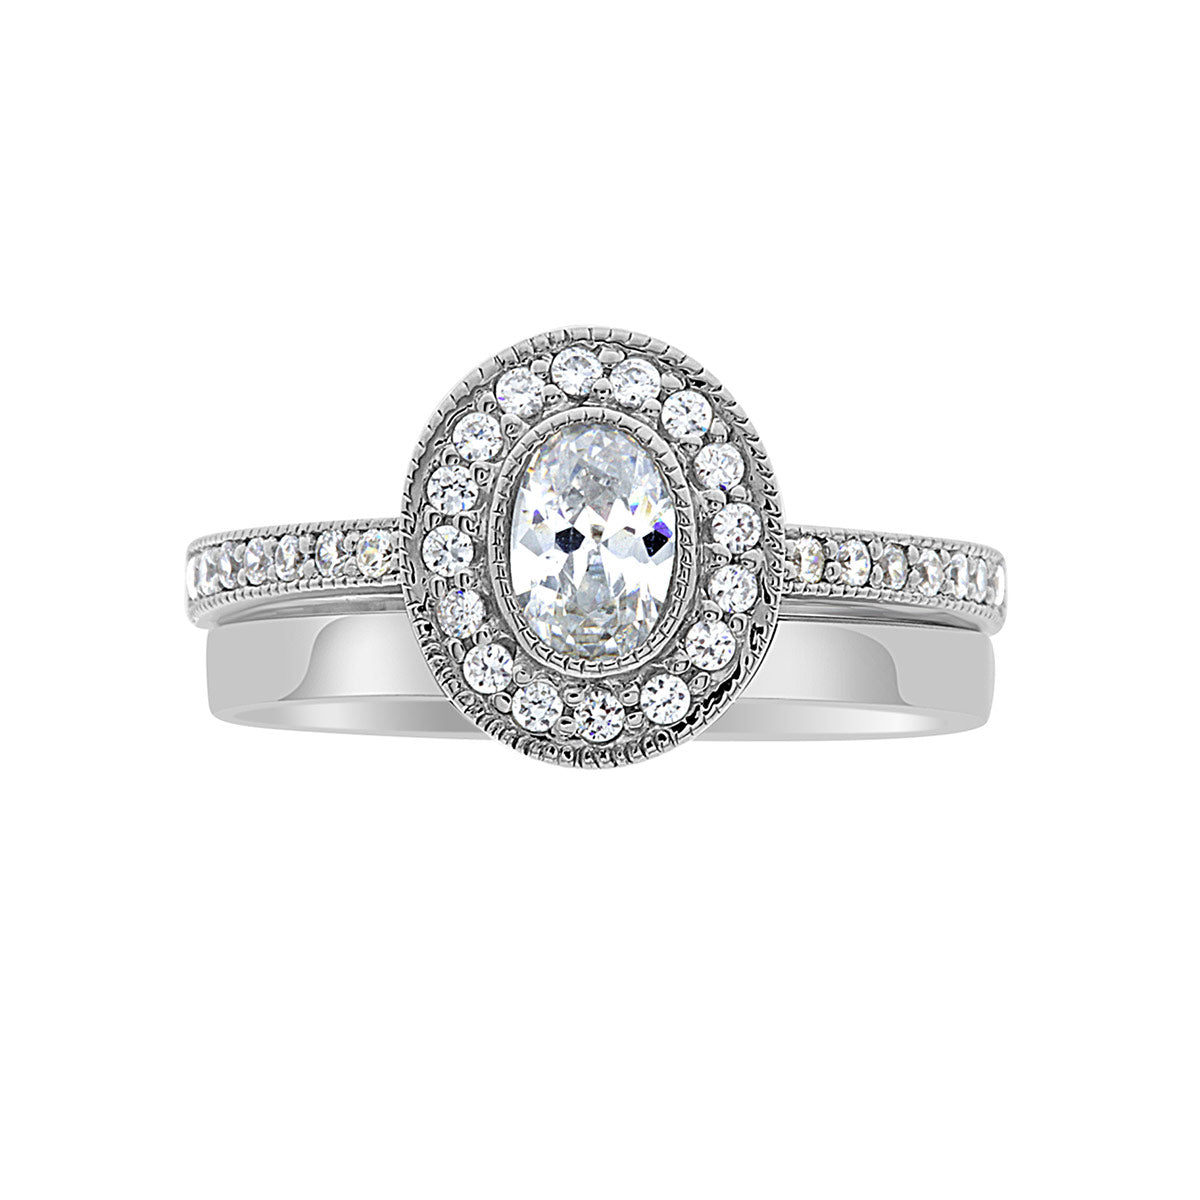 Milgrain Detail Engagement Ring with a matching white gold plain wedding band